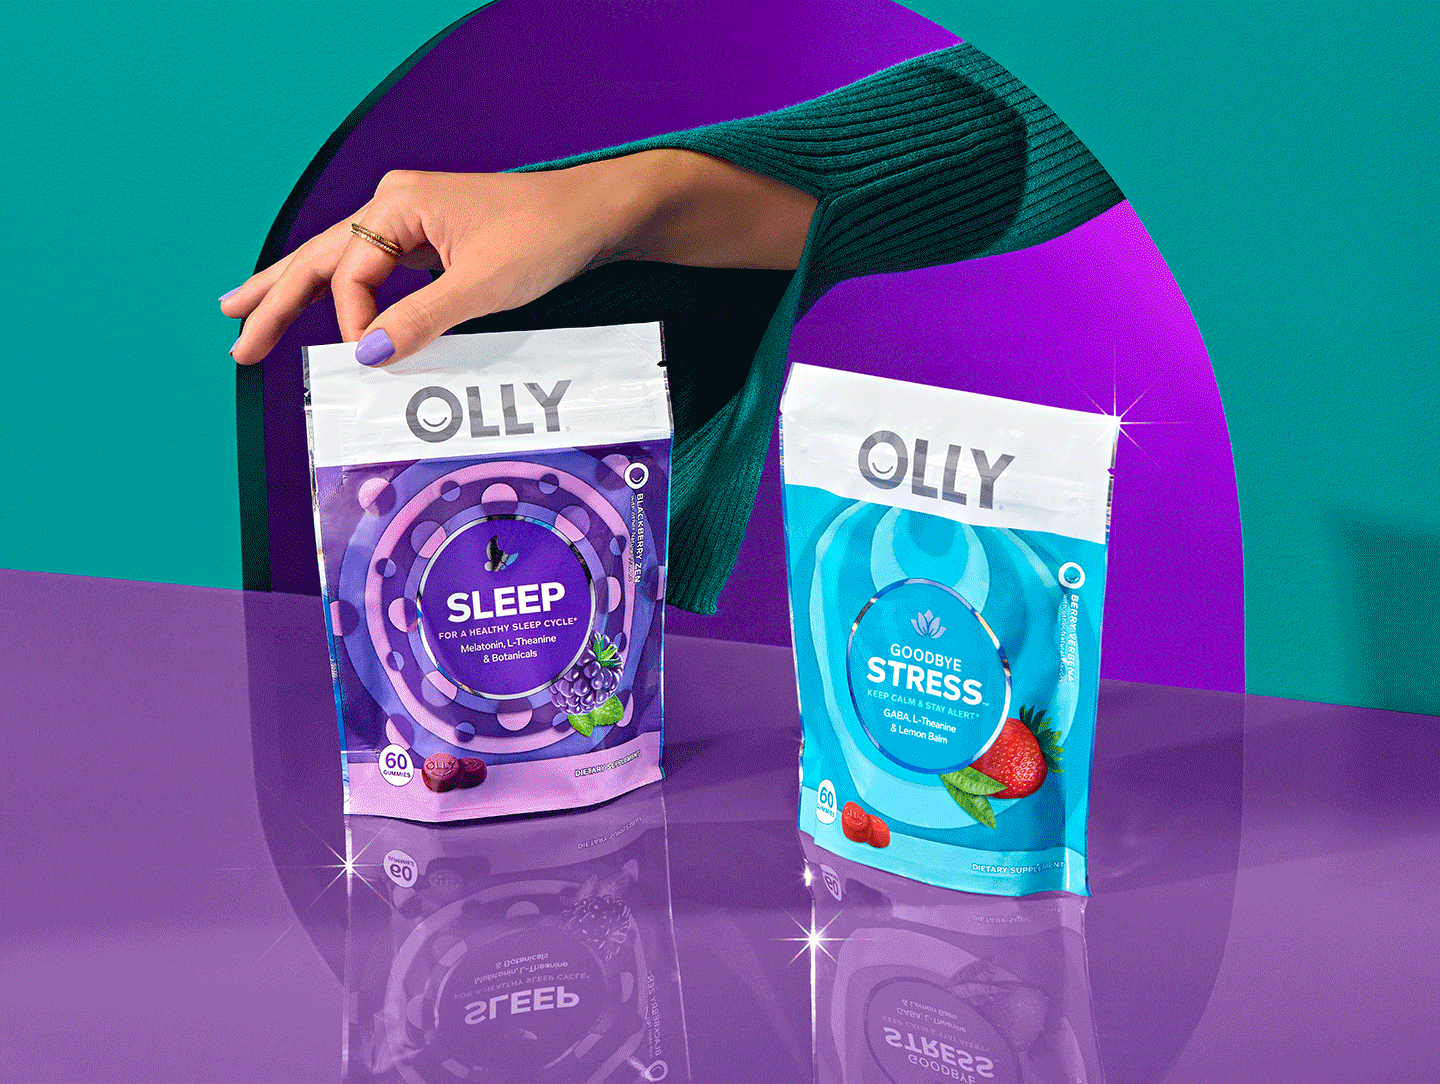 OLLY Products